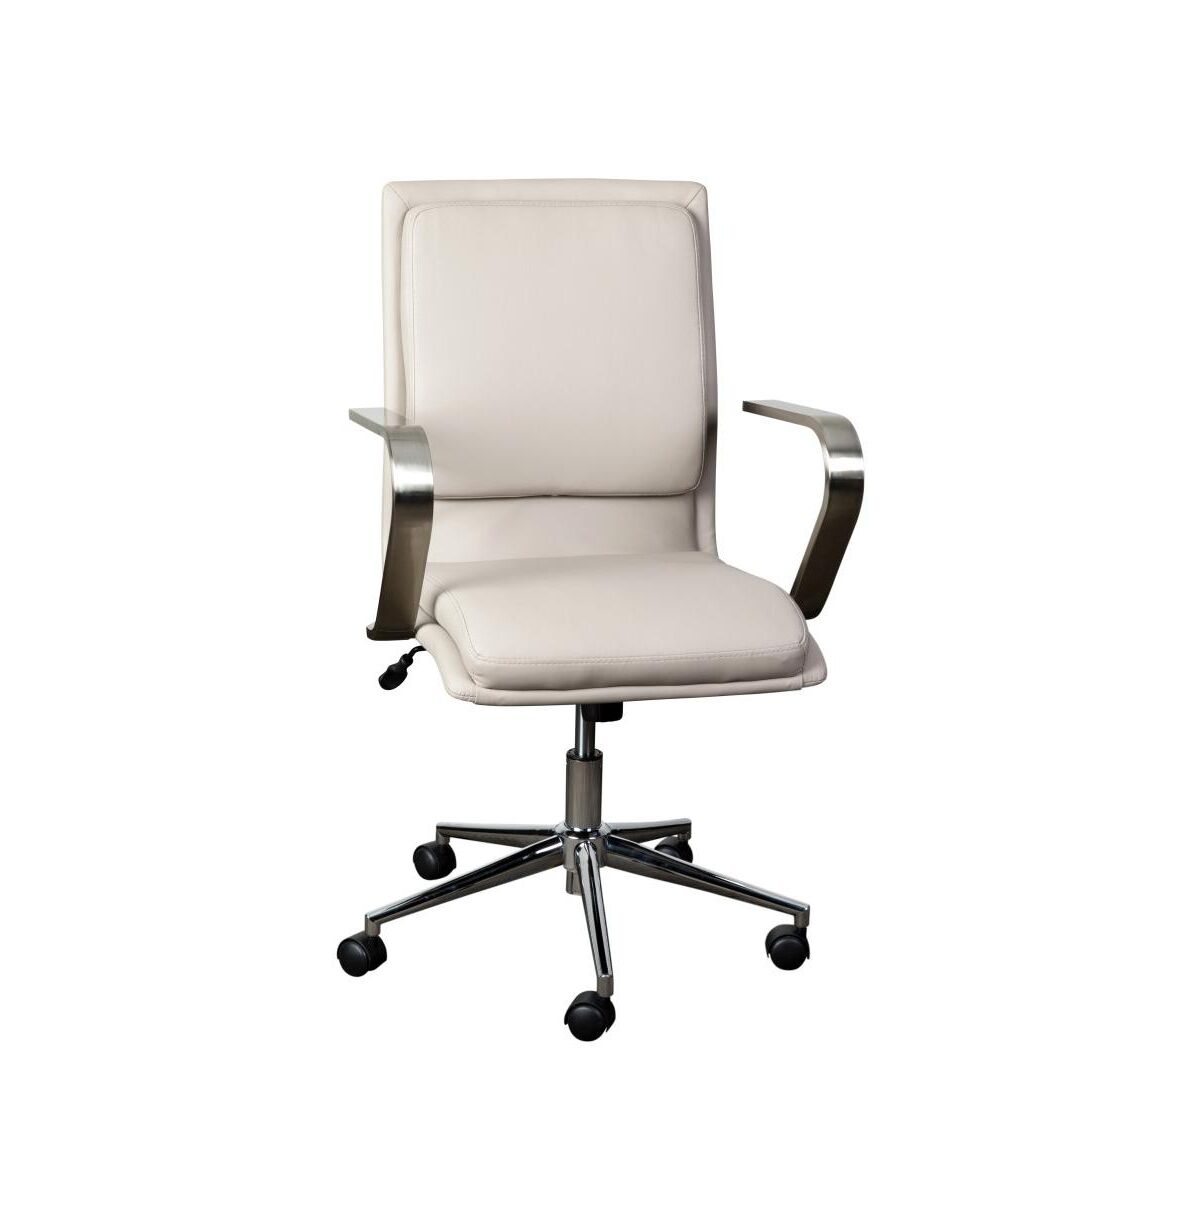 Merrick Lane Artemis Mid-Back Home Office Chair With Armrests, Height Adjustable Swivel Seat And Five Star Base - Taupe/chrome